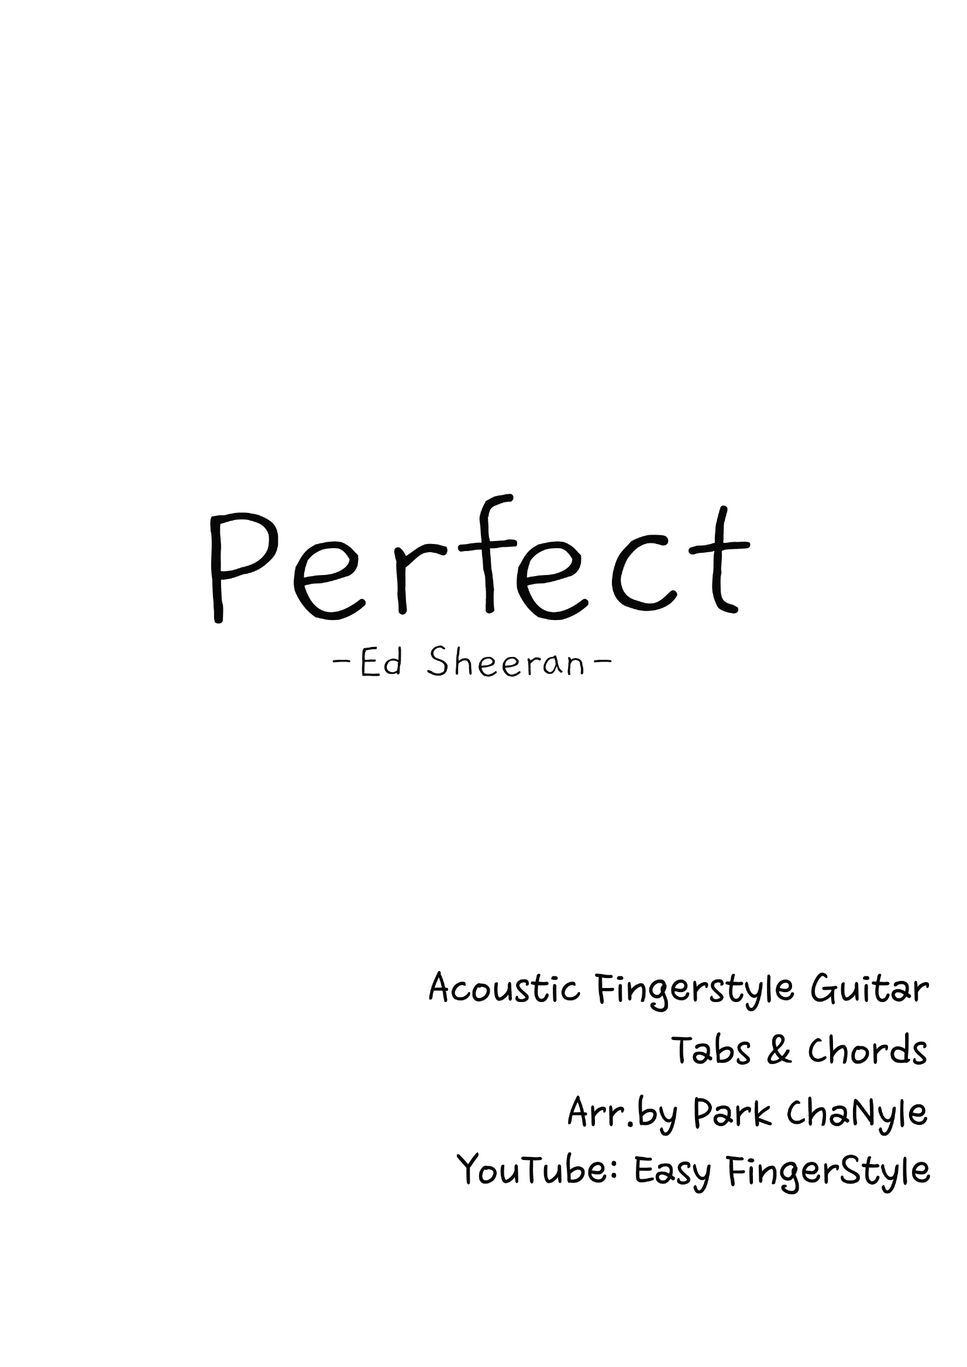 Ed Sheeran - Perfect (Fingerstyle Guitar) by Park ChaNyle